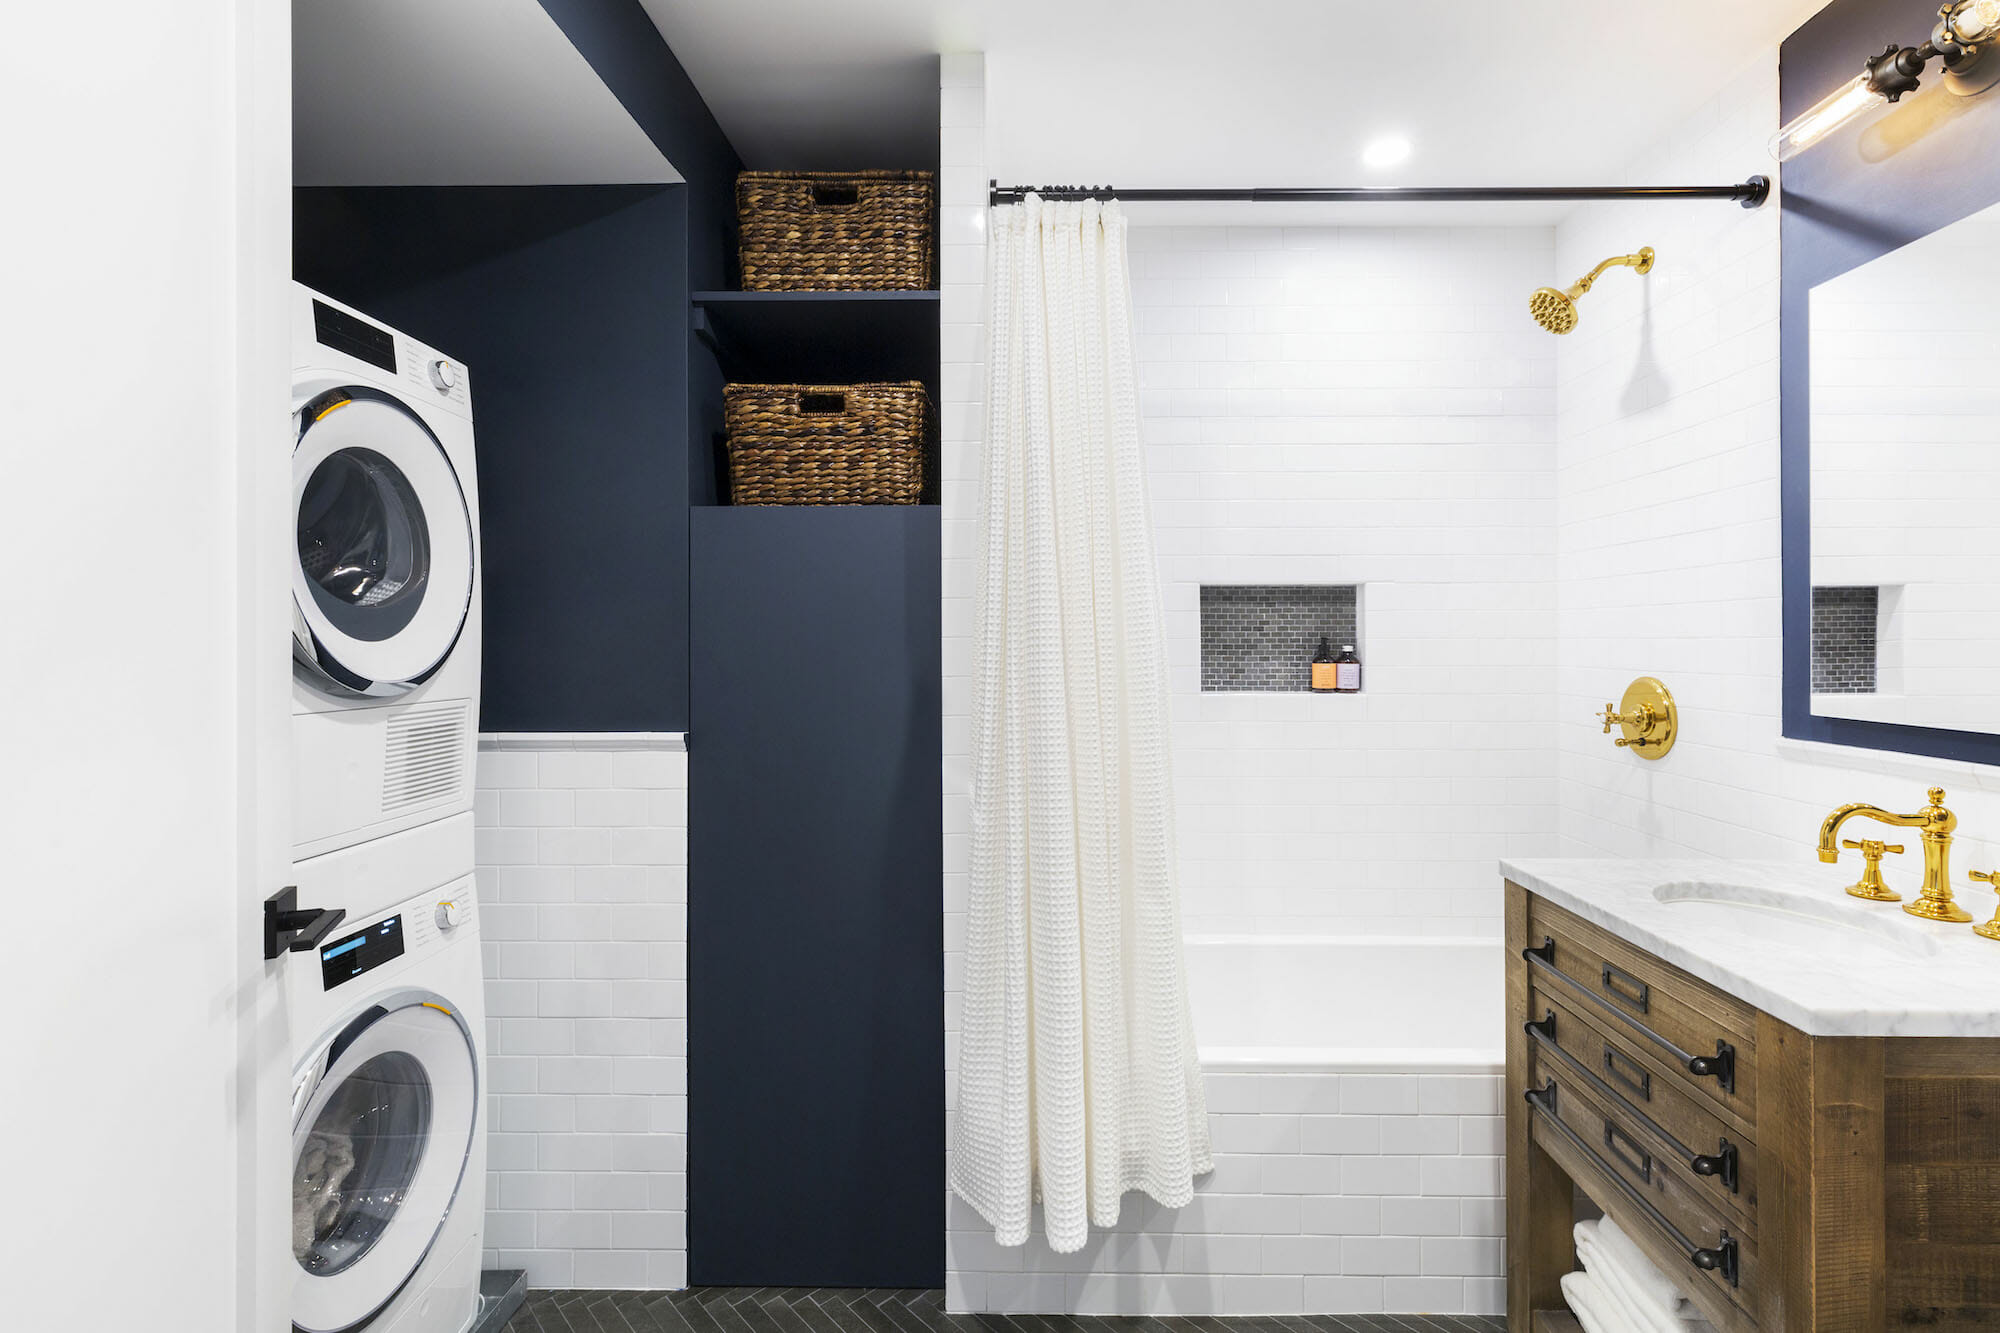 Adding A Washer And Dryer To A Condo